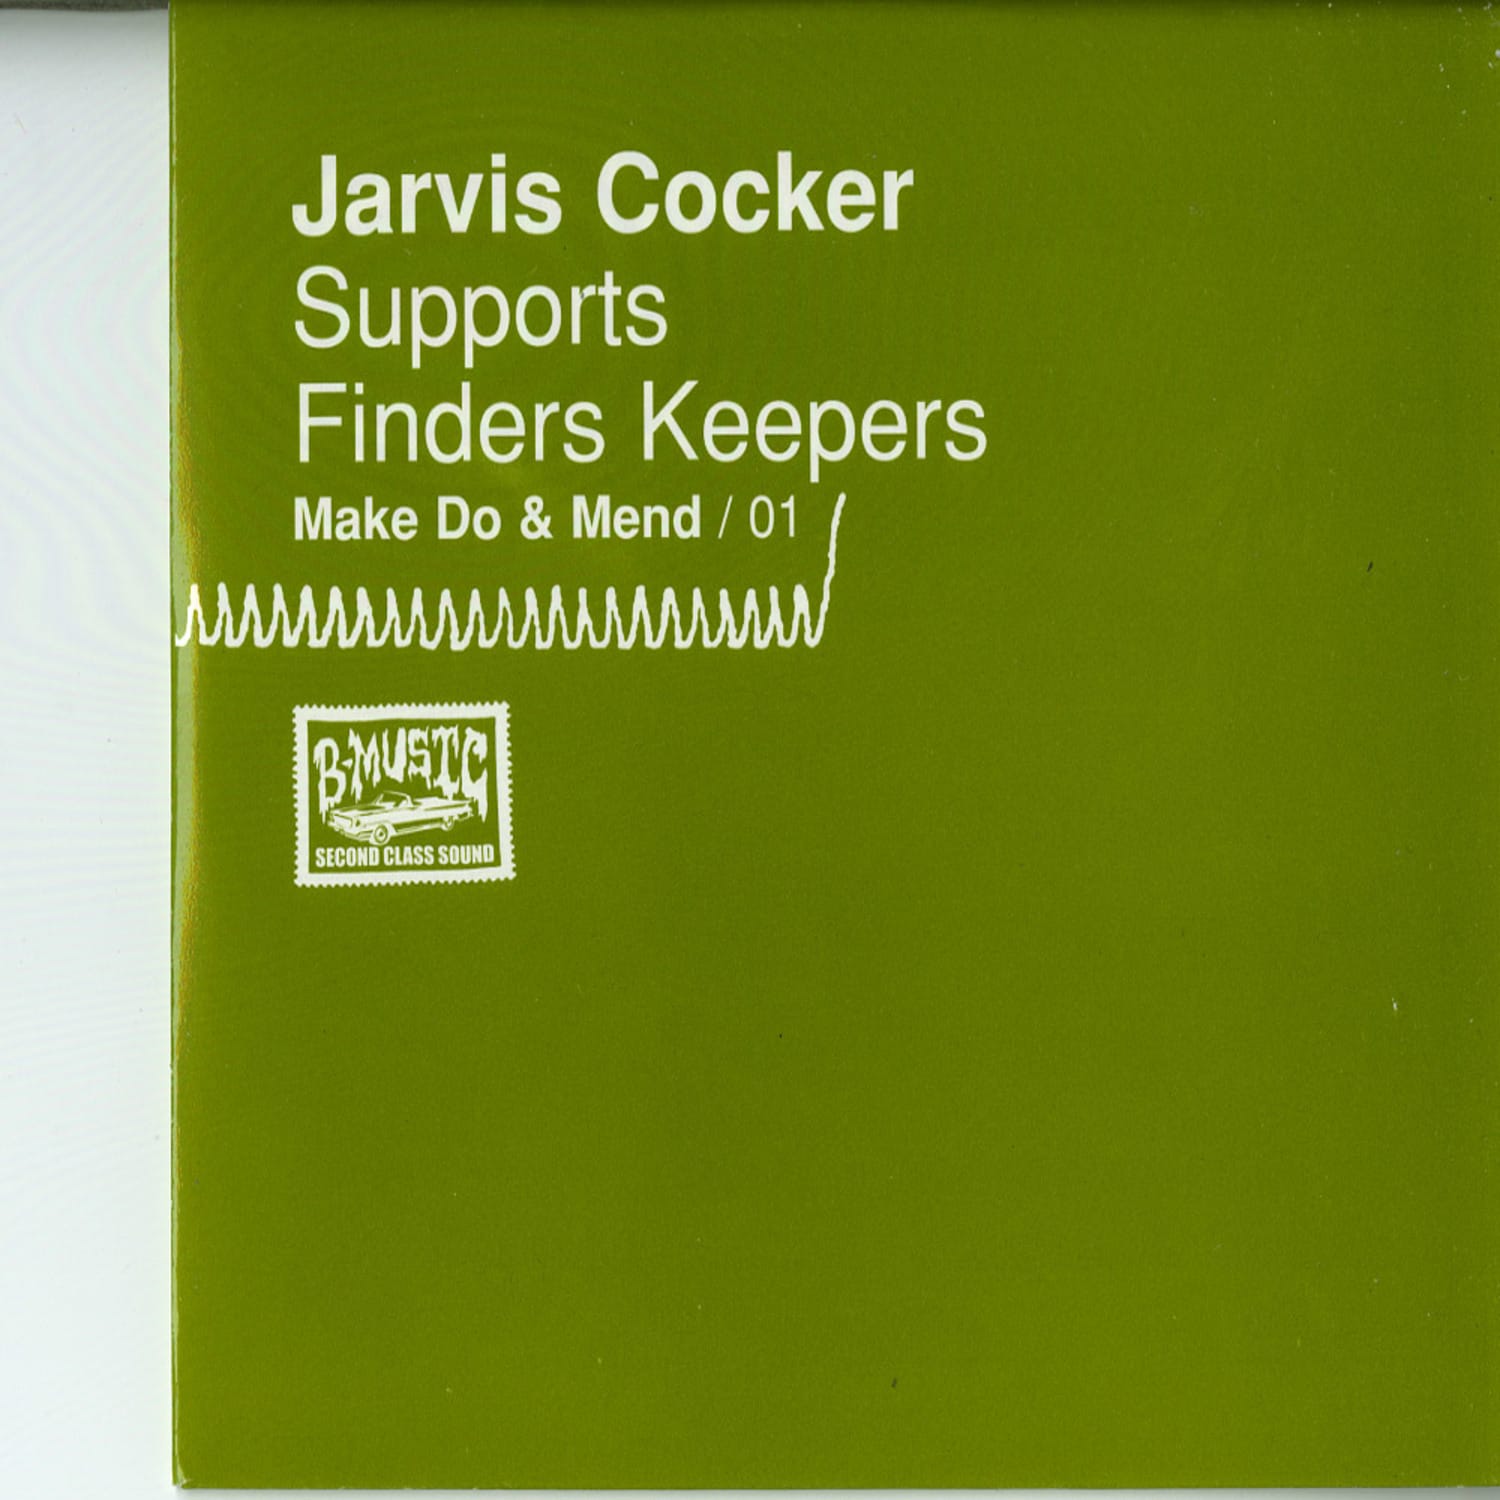 Jarvis Cocker - MAKE DO AND MEND VOL. 1 